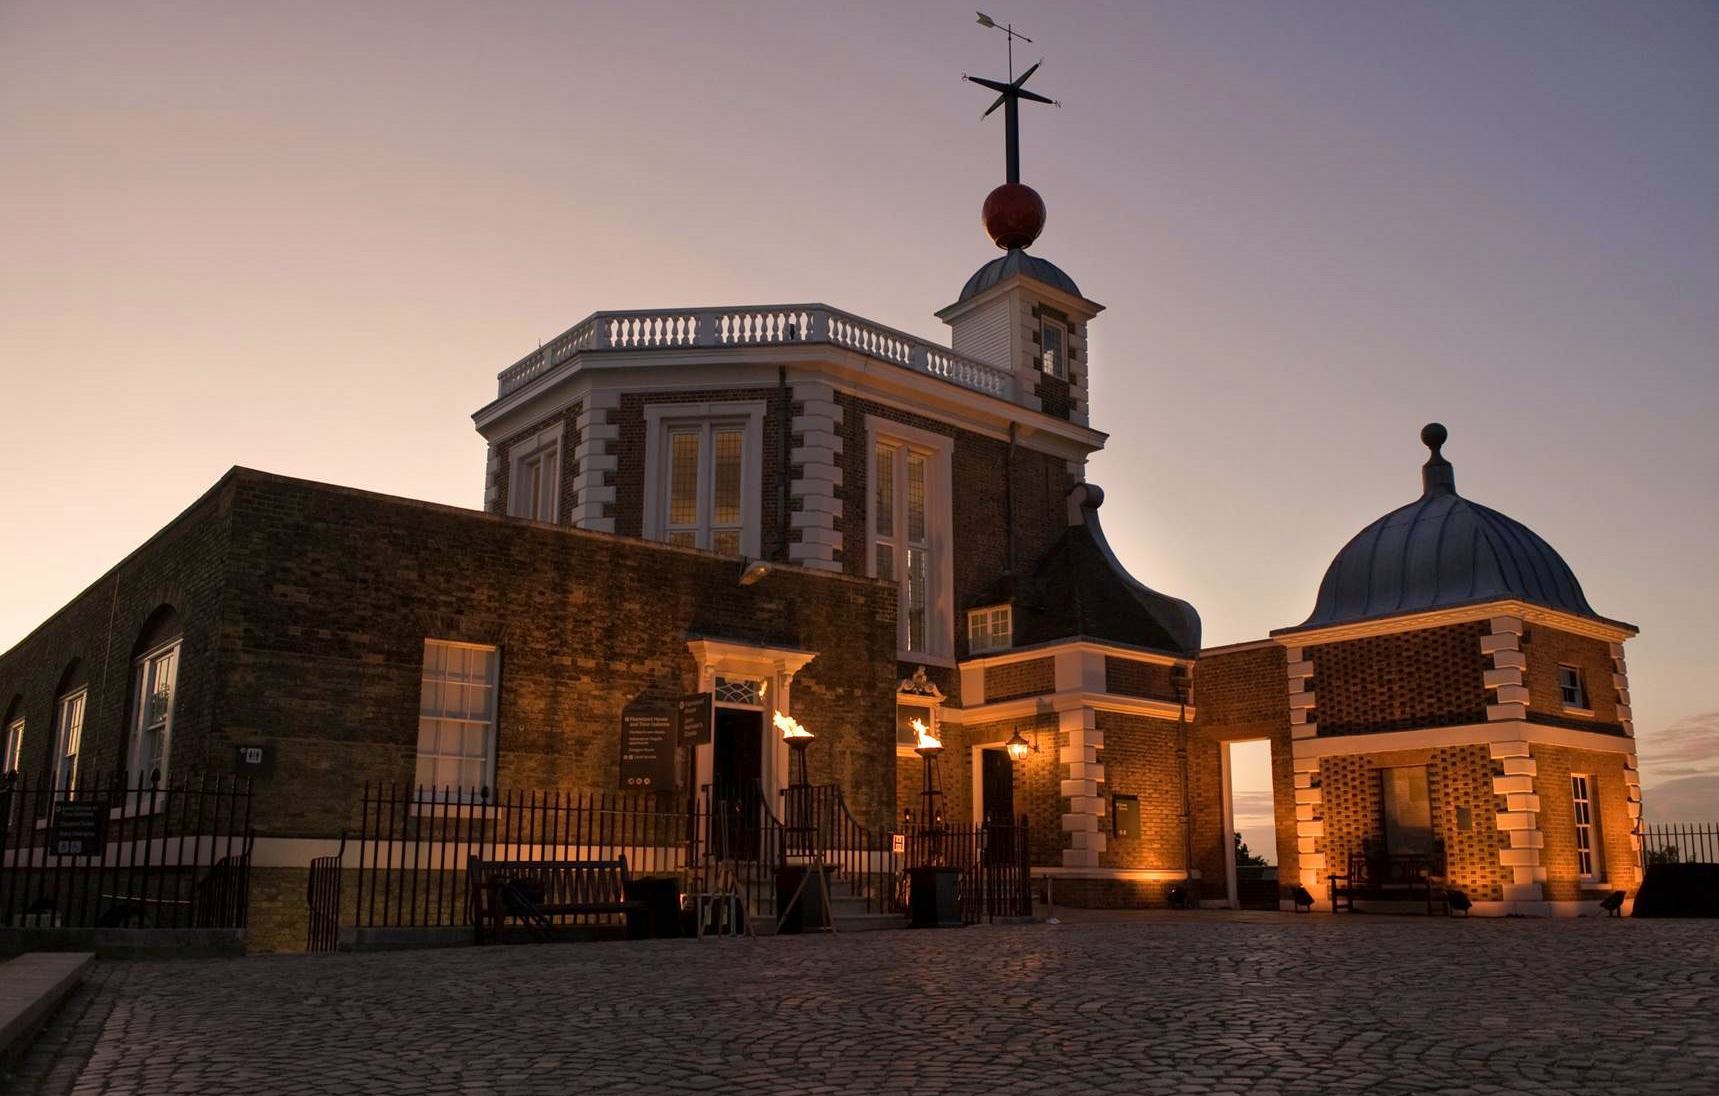 Weddings at The Royal Observatory greenwich venue hire events exterior evening